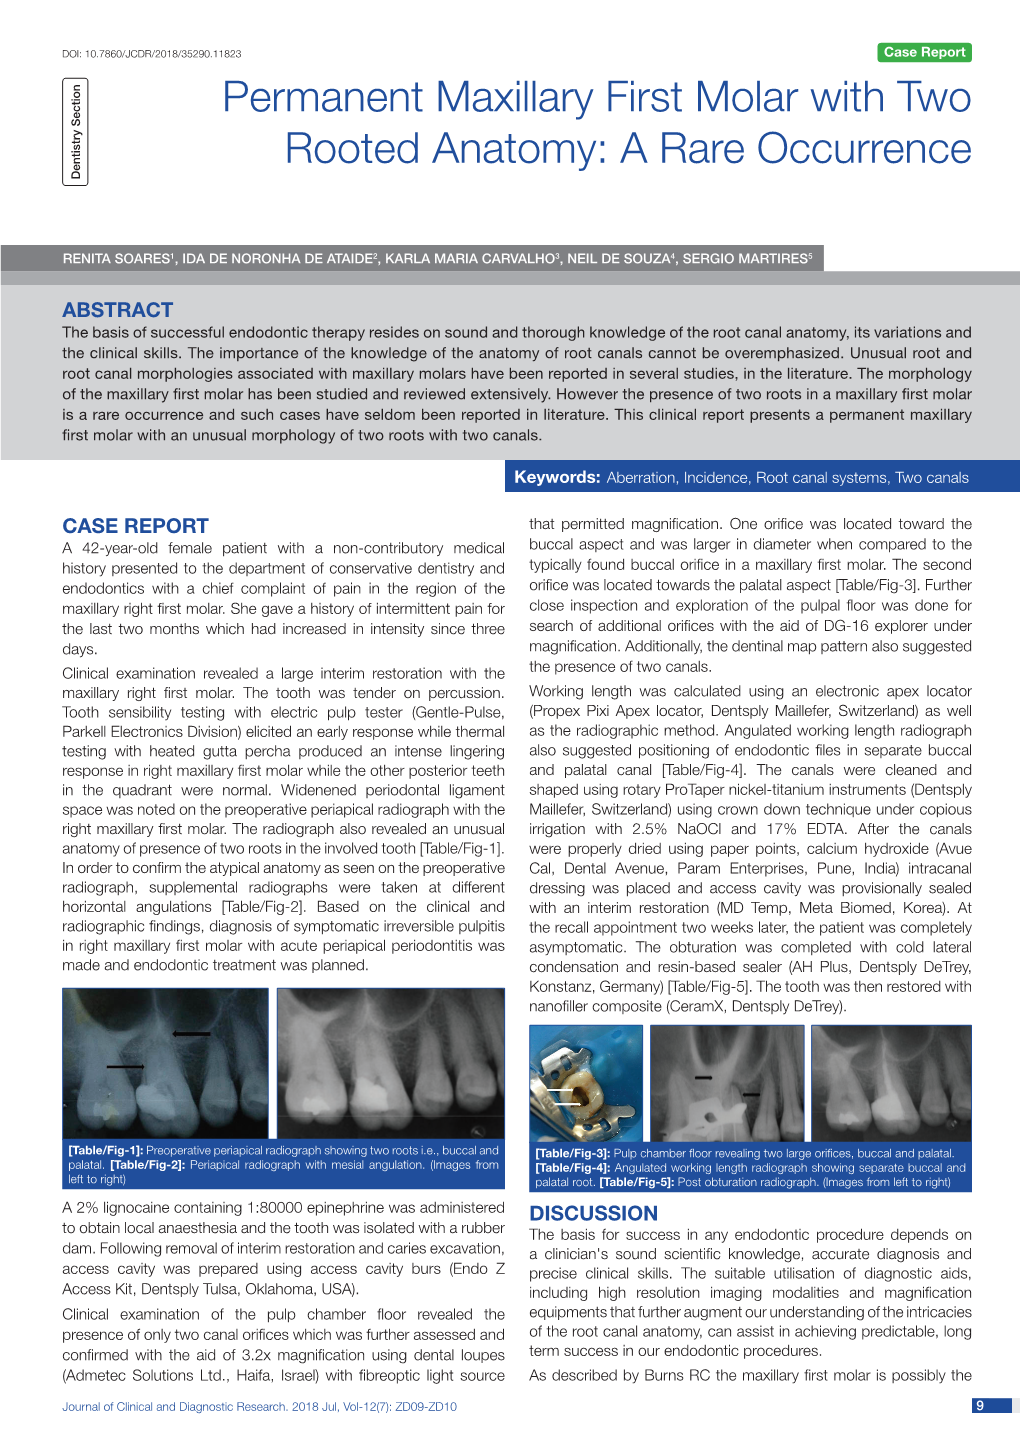 Permanent Maxillary First Molar with Two Rooted Anatomy: a Rare Occurrence Dentistry Section